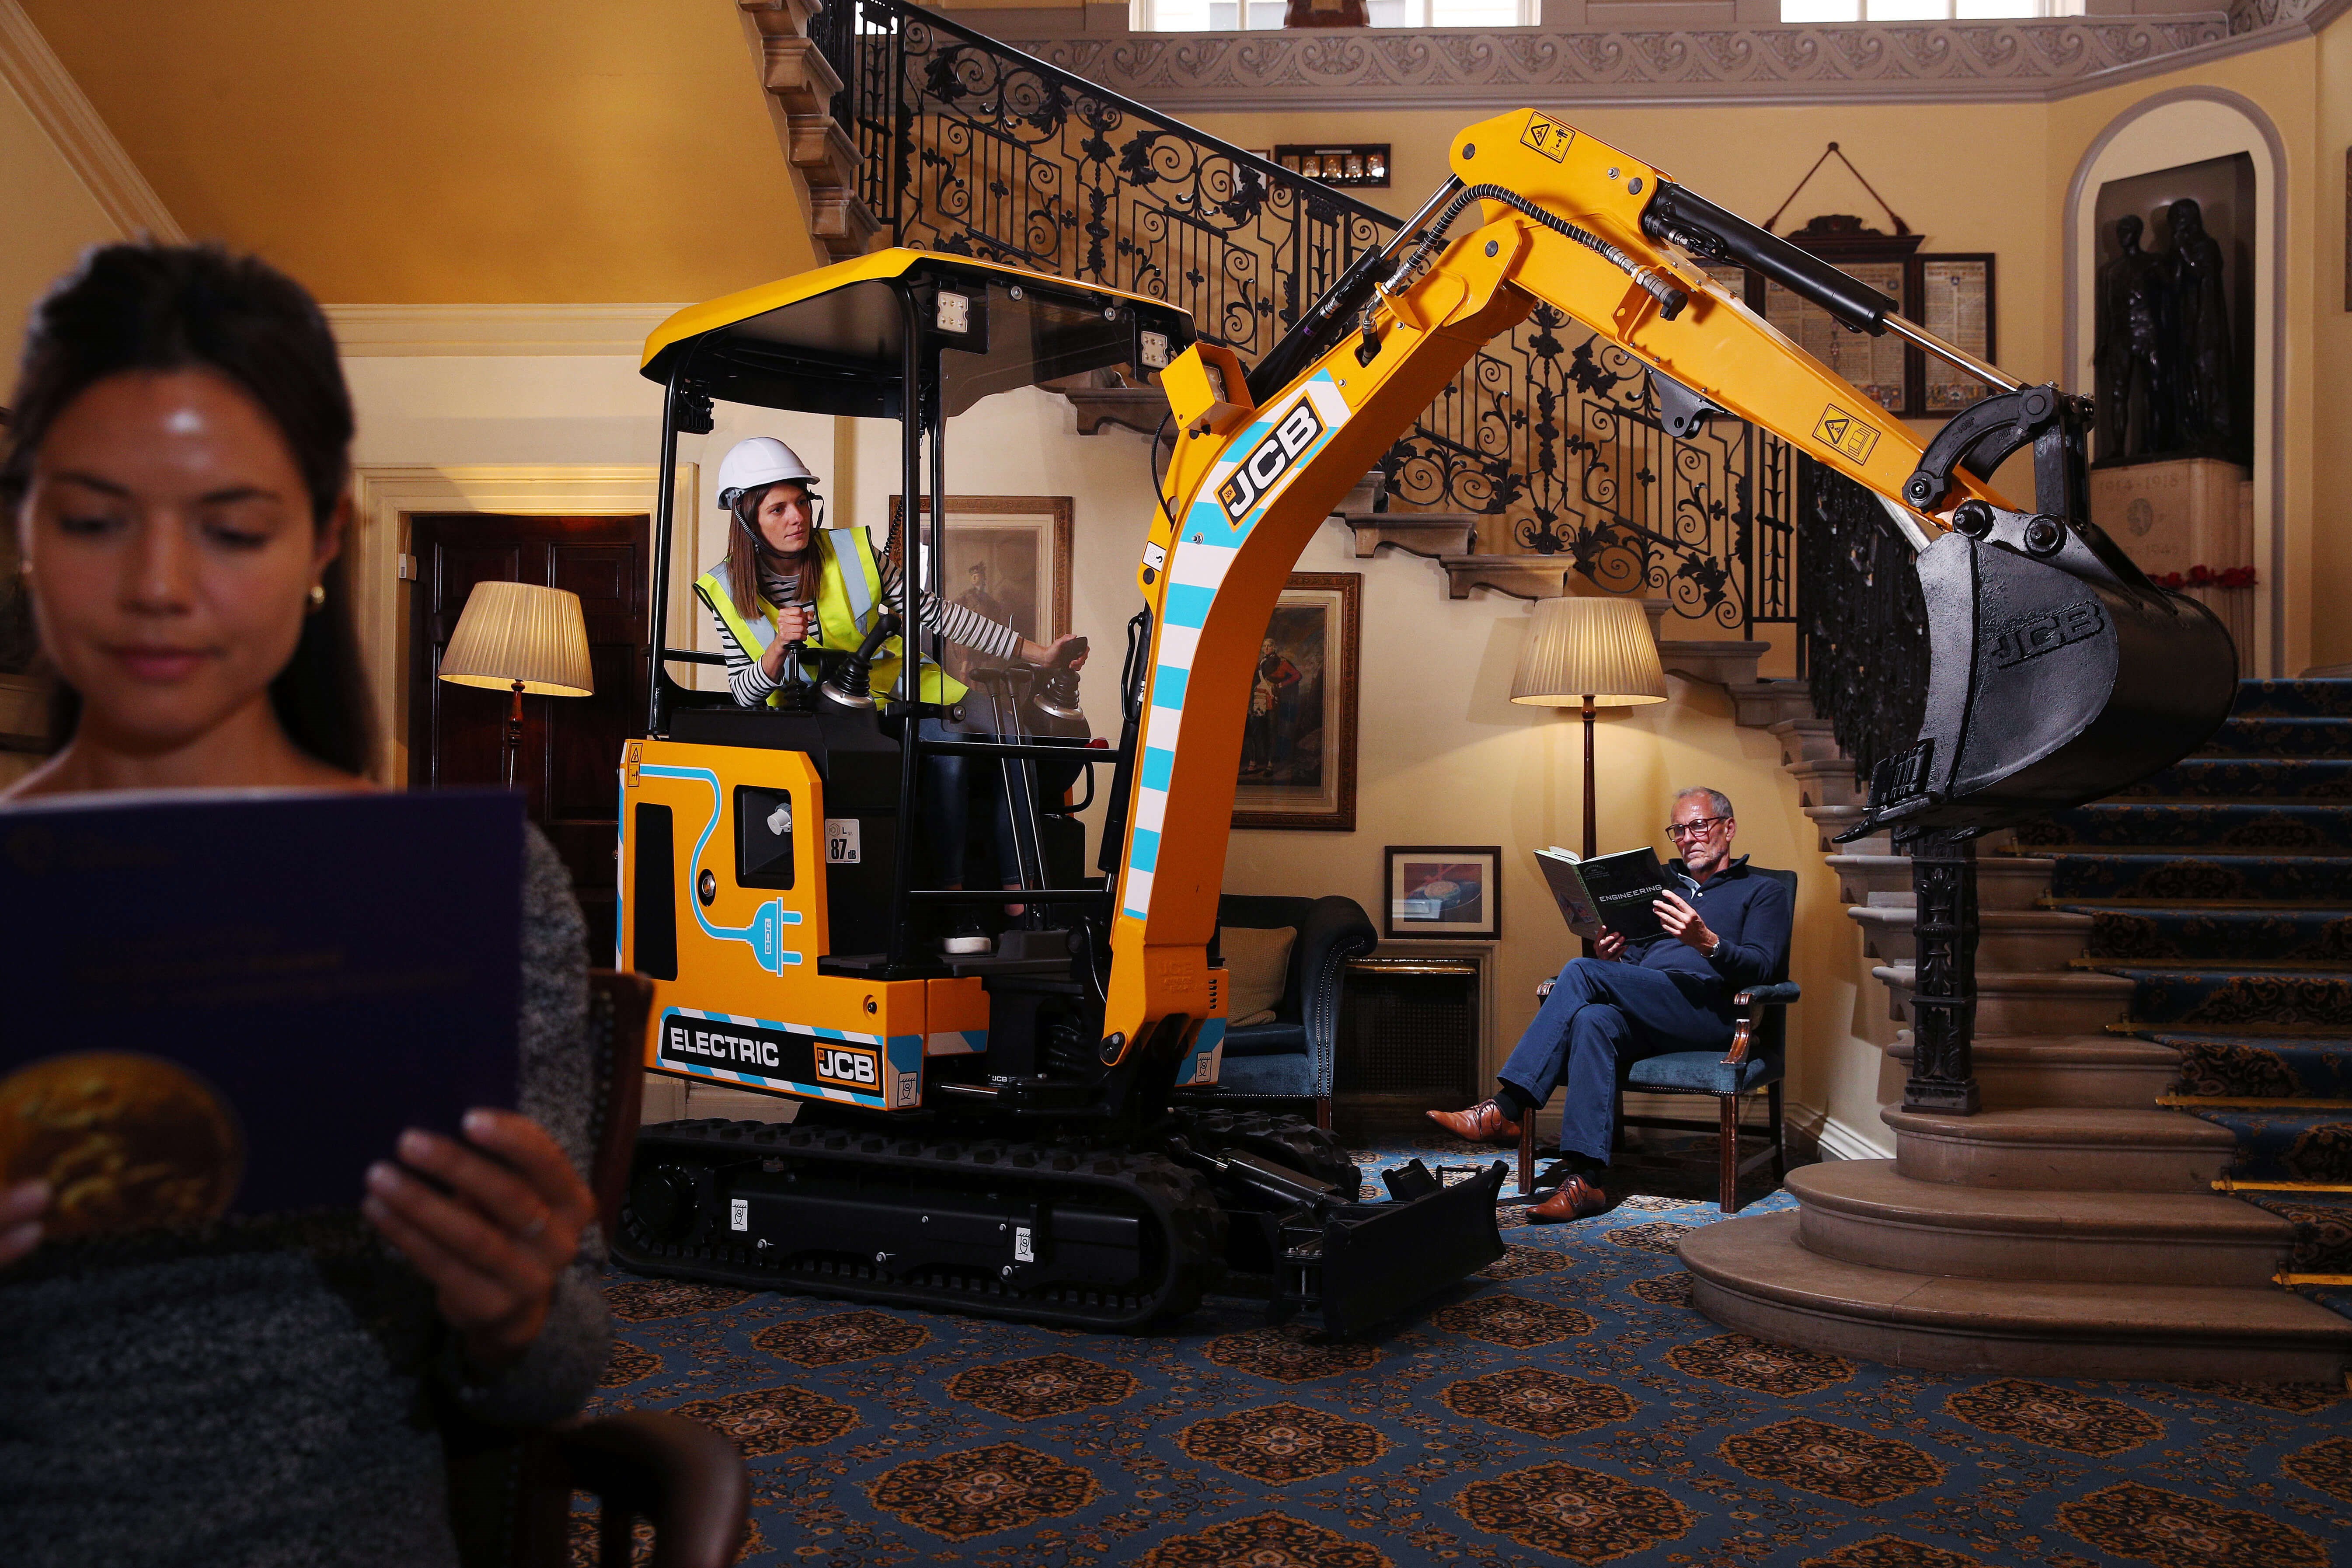 JCB electric digger being operated indoors, next to two people reading and unaware of its presence